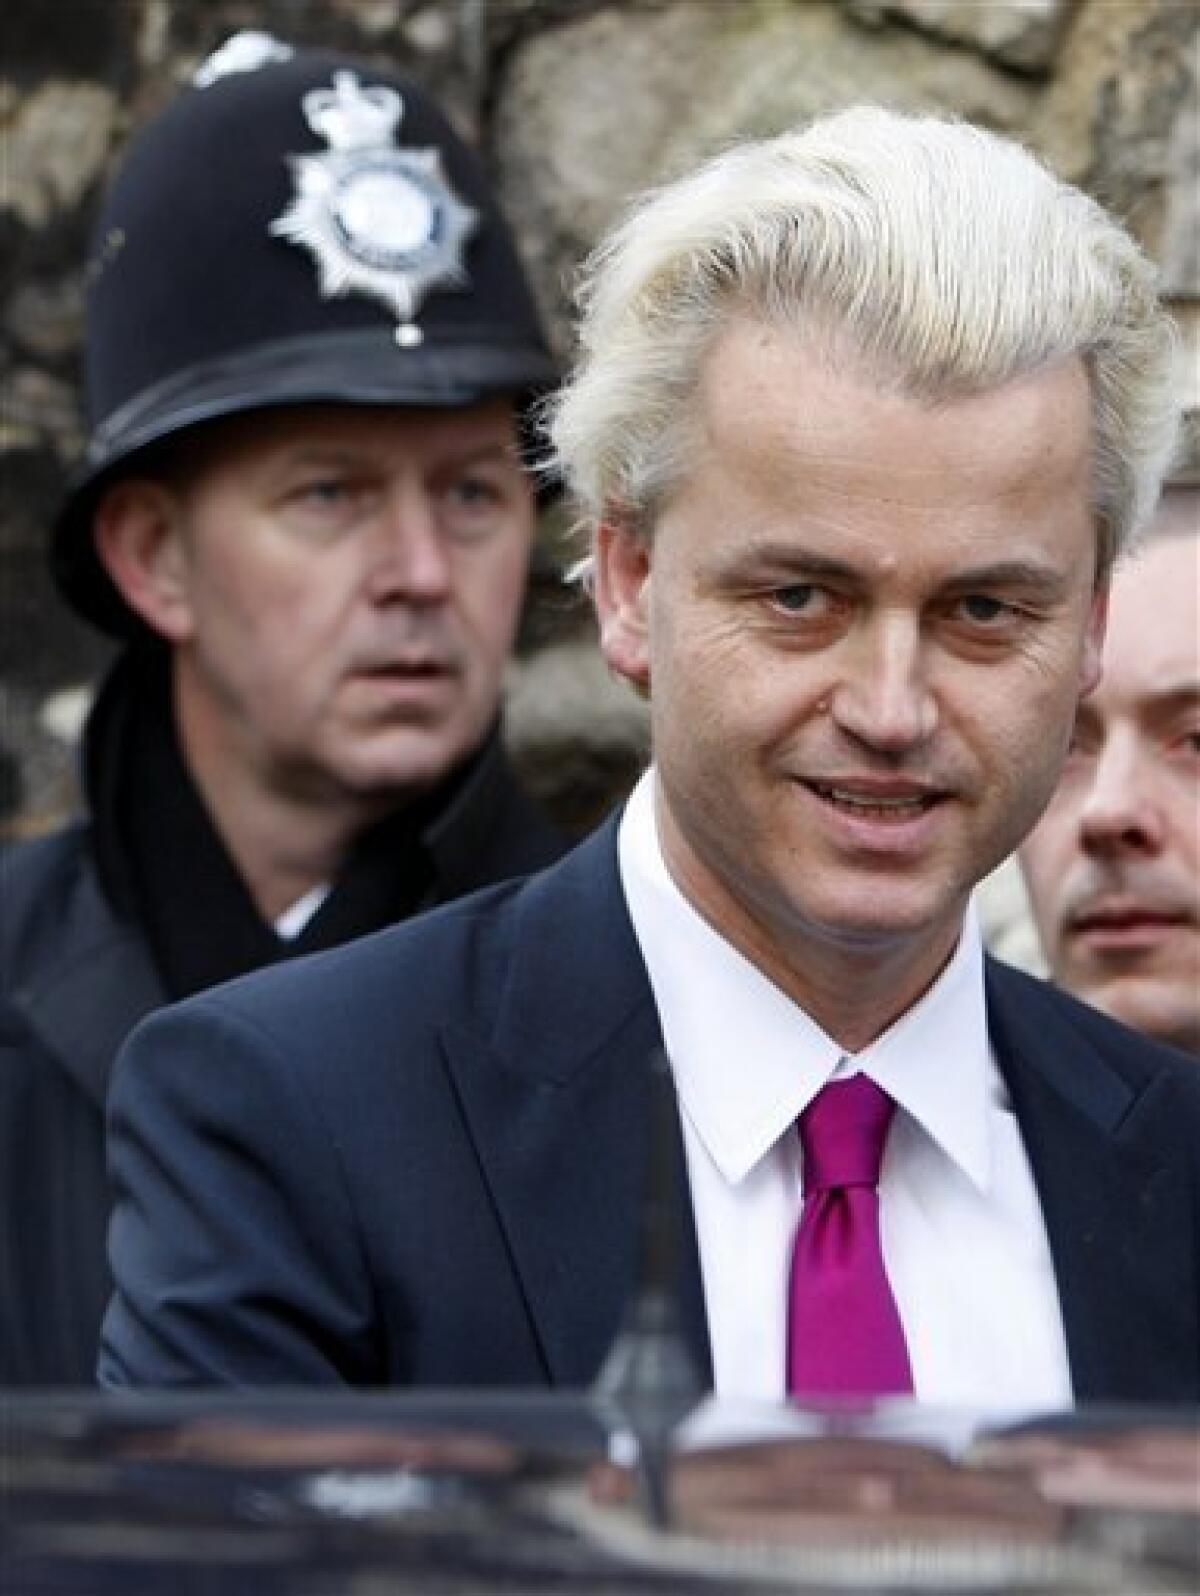 Controversial Dutch politician Geert Wilders leaves a press conference in London, Friday, March 5, 2010. (AP Photo/Kirsty Wigglesworth)